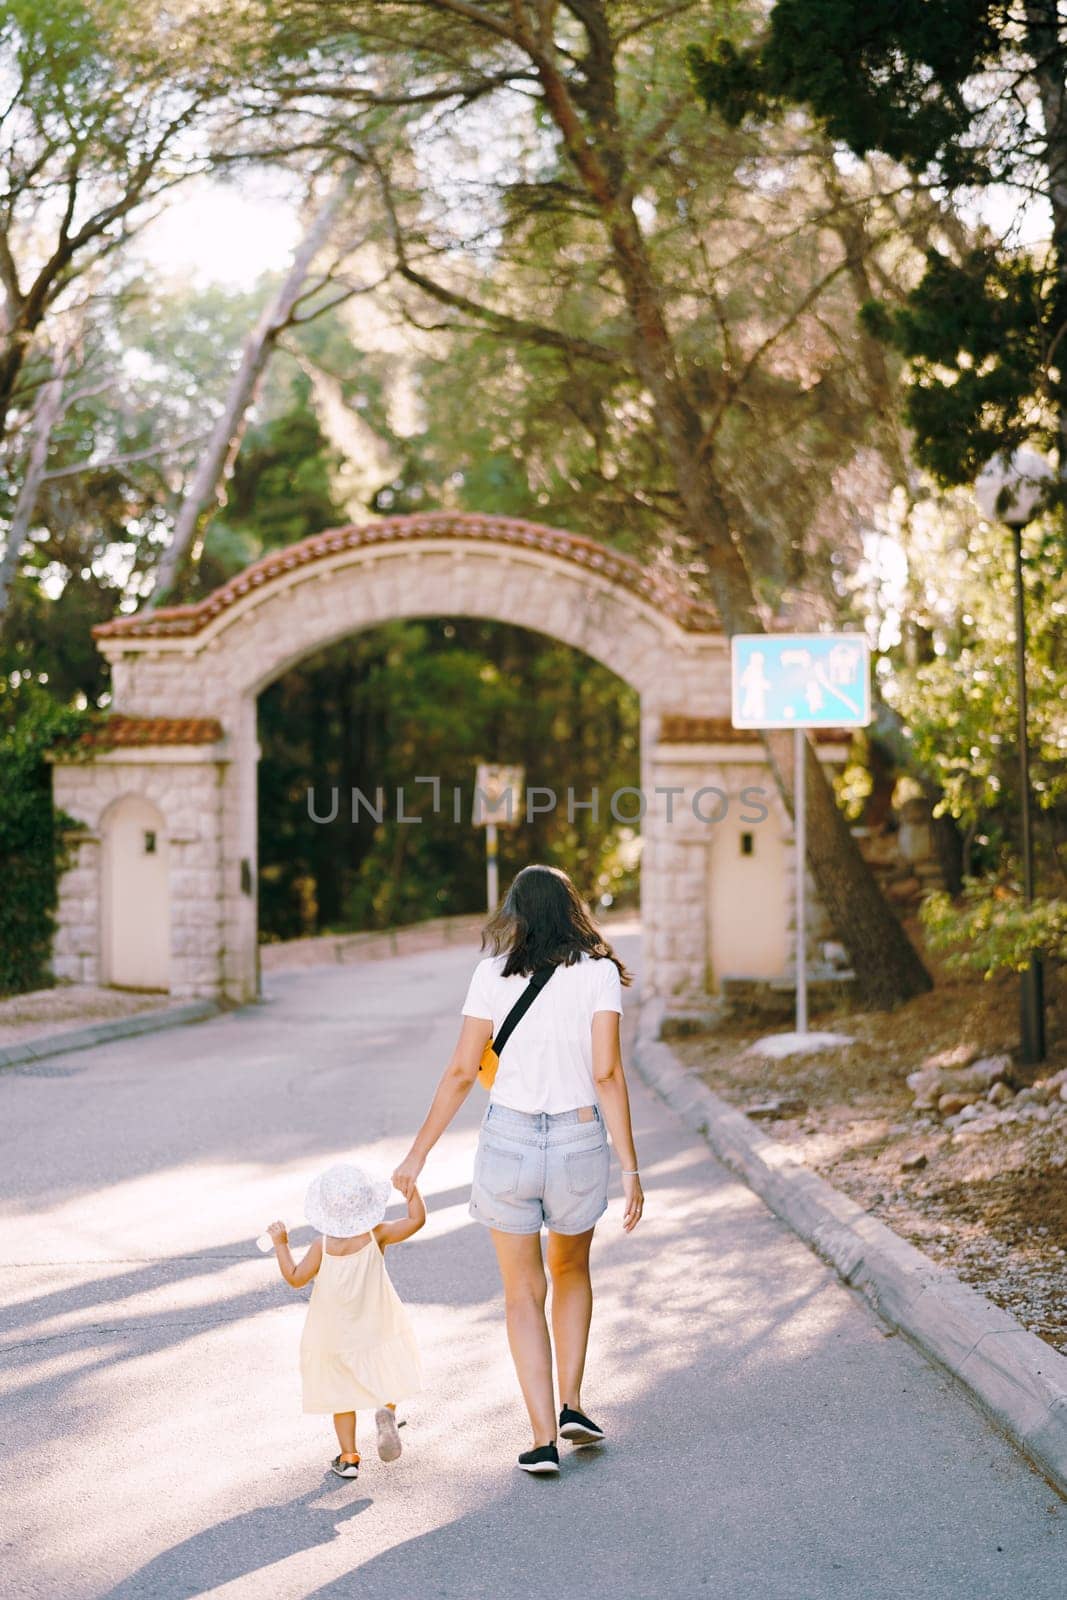 Mom leads a little girl by the hand along the road to the gates of the park. Back view by Nadtochiy